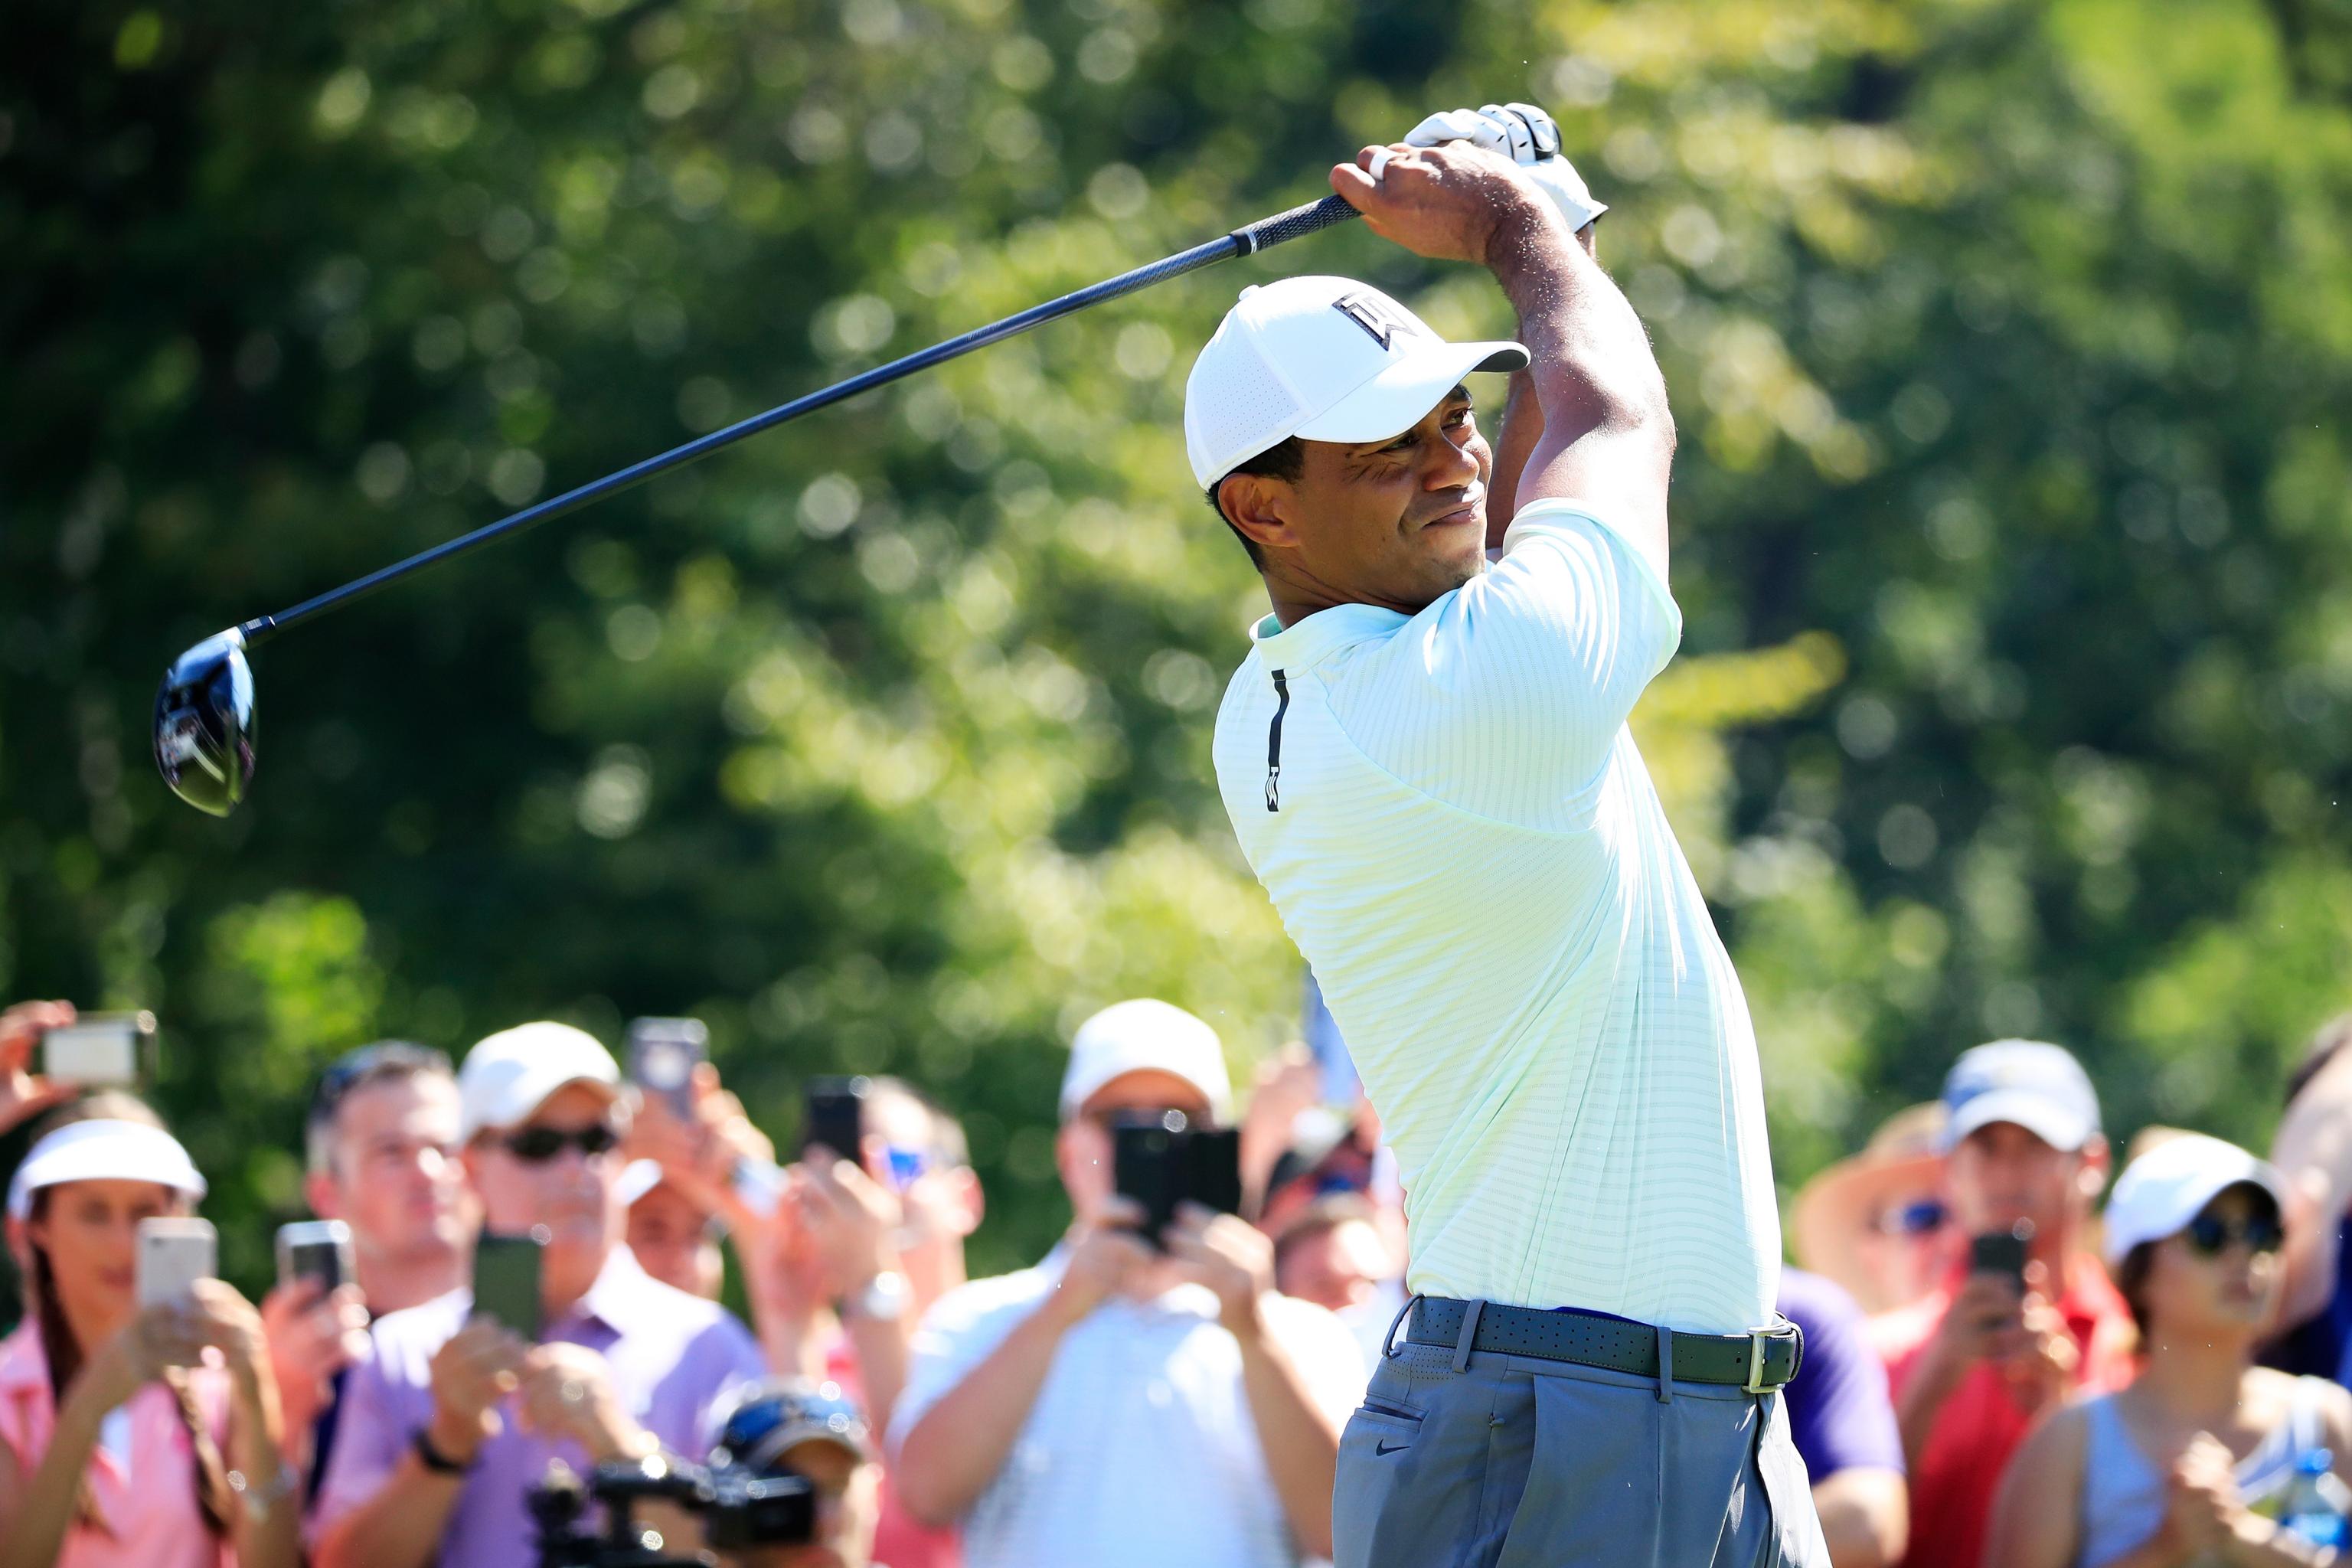 Tiger Woods Roars Out To 7 Under After 10 Holes Of 2018 Bmw Championship Bleacher Report Latest News Videos And Highlights